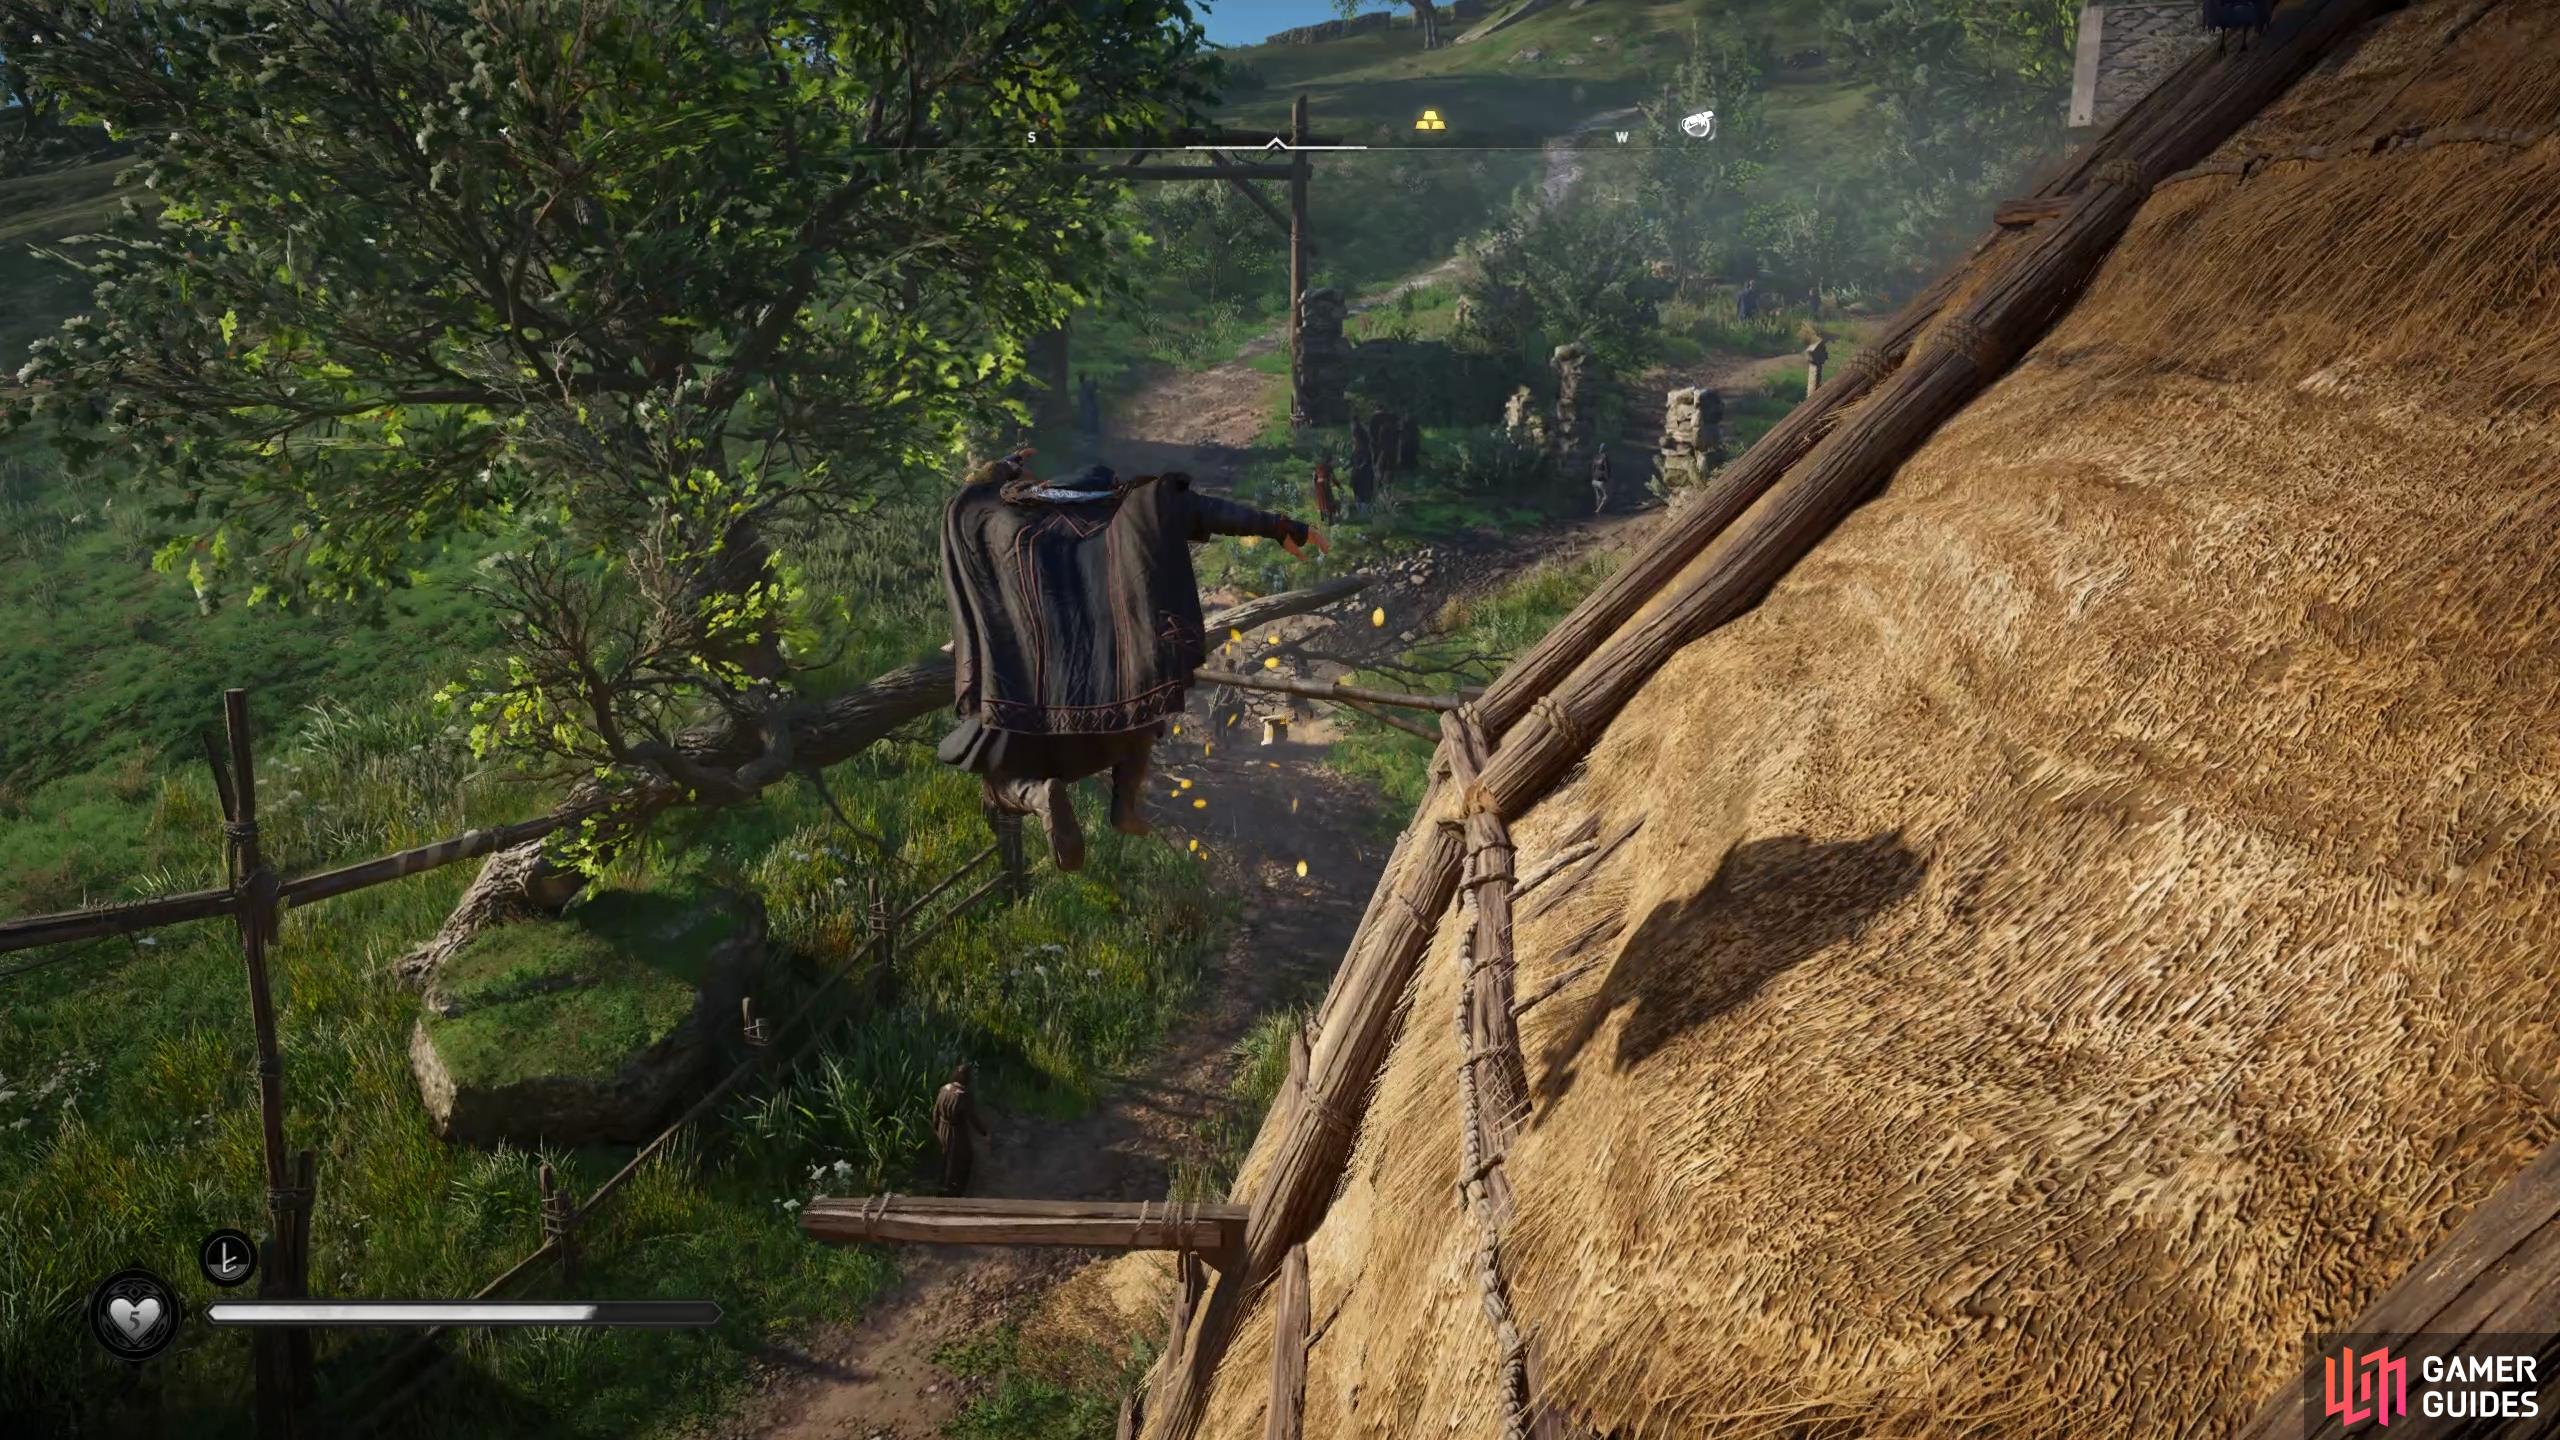 Youll need to catch the paper in mid air as you jump into the haystack below.